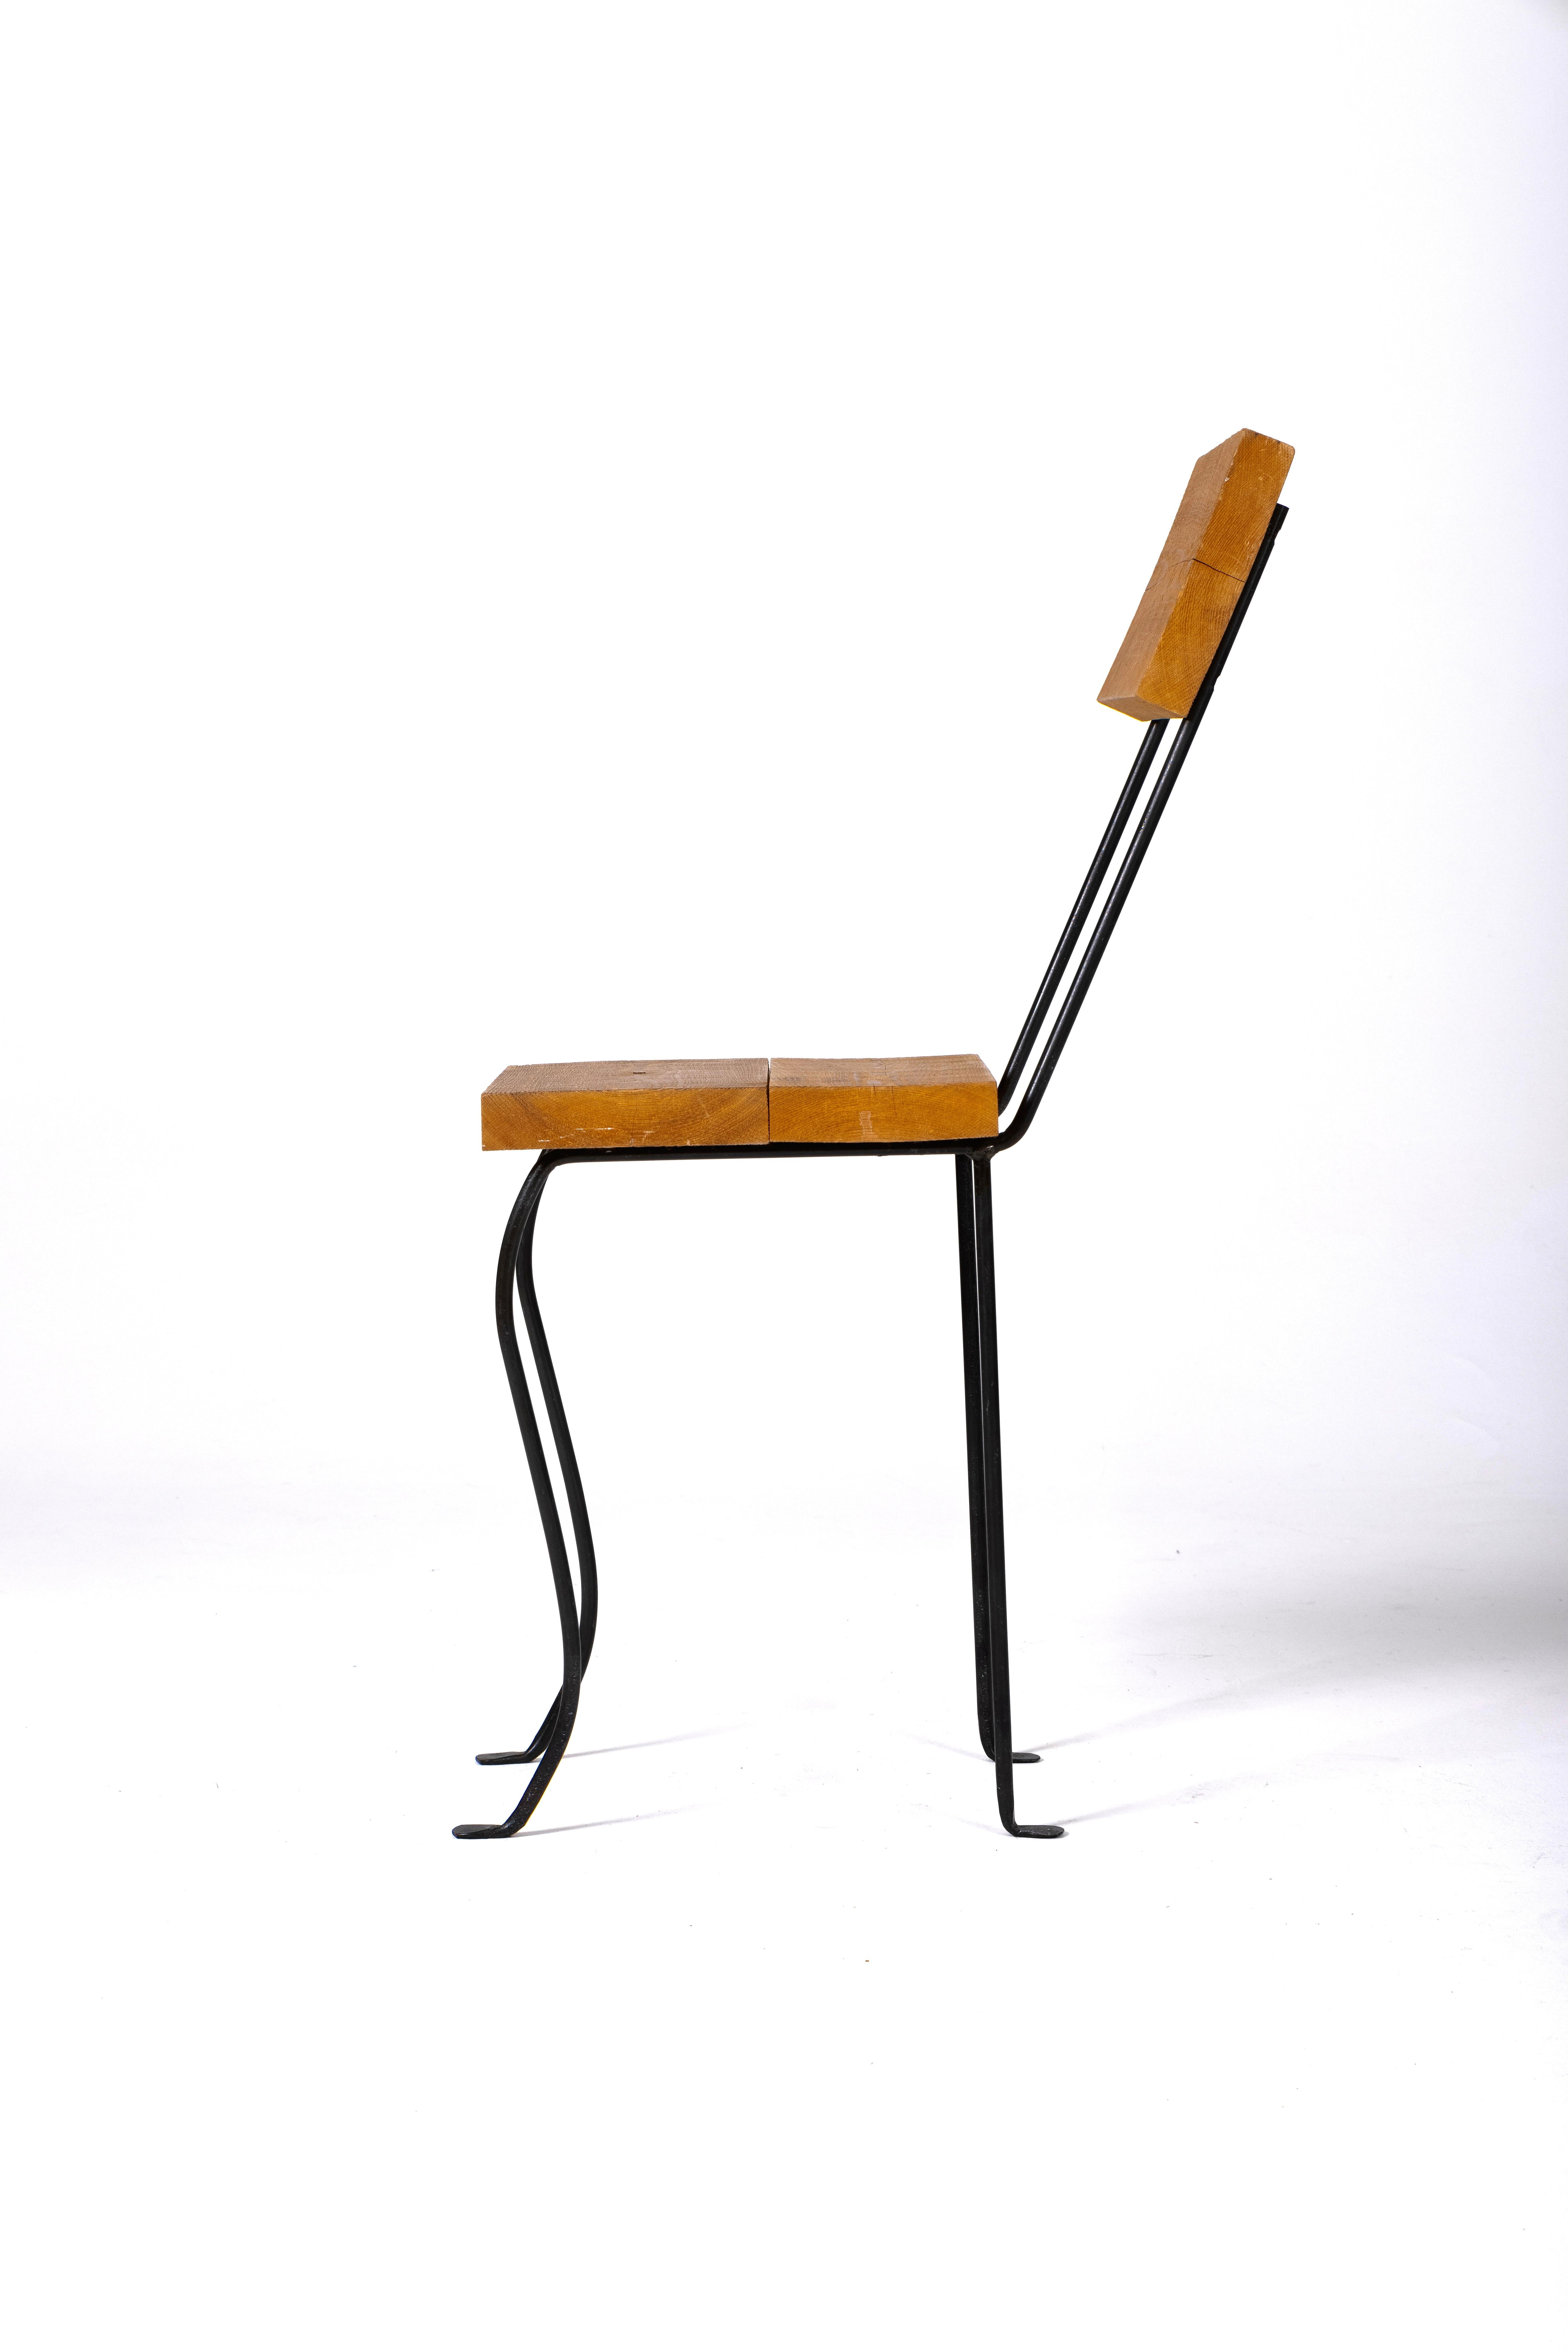 Wood and metal chair by Patrice Gruffaz For Sale 2